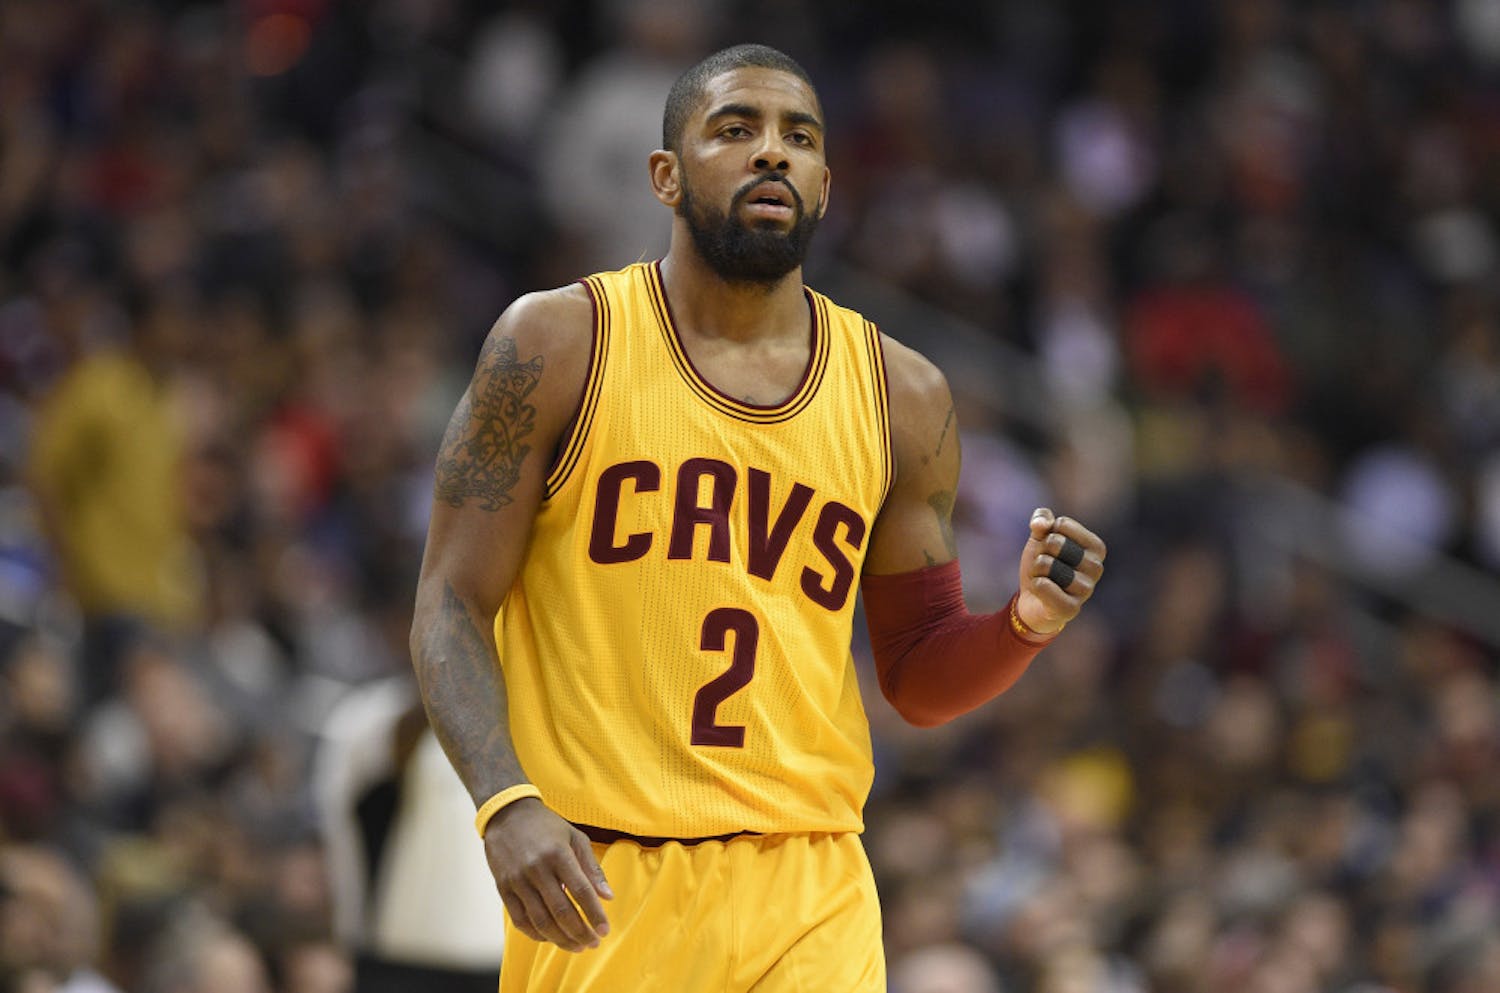 Cleveland Cavaliers guard Kyrie Irving (2) reacts during the second half of an NBA basketball game against the Washington Wizards, Monday, Feb. 6, 2017, in Washington. The Cavaliers won 140-135 in overtime. (AP Photo/Nick Wass)